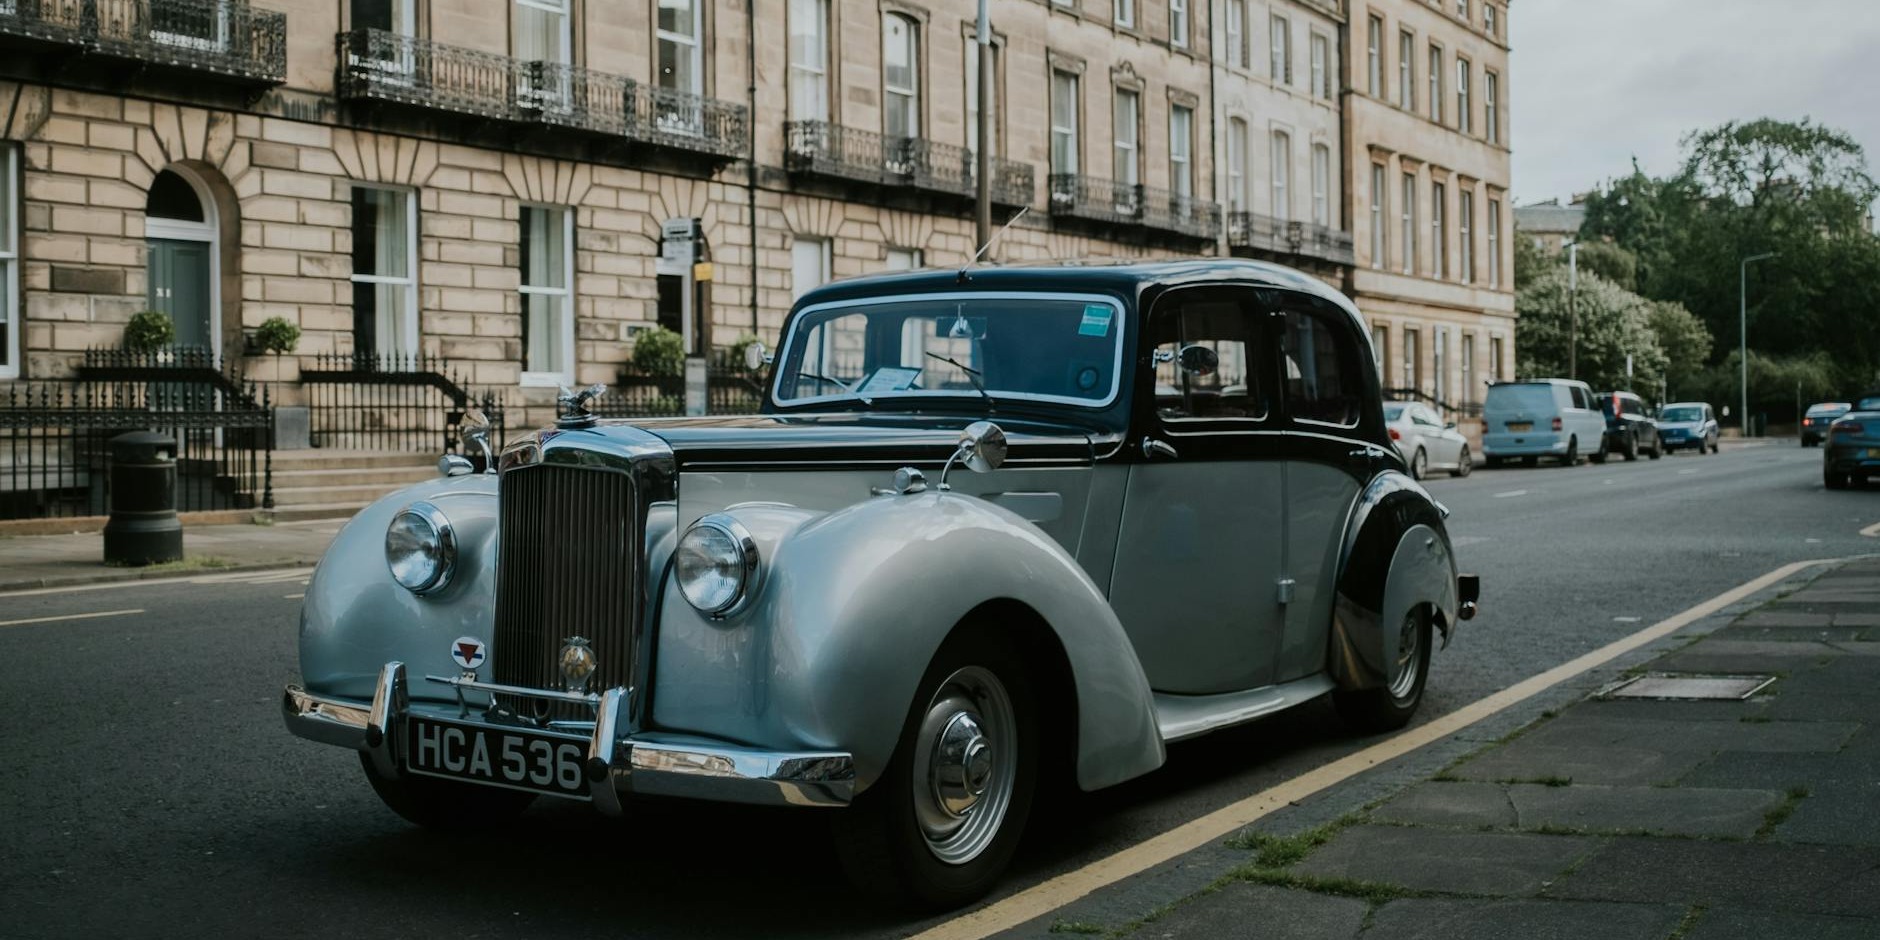 Best Luxury Car Hire Options for Prom in London